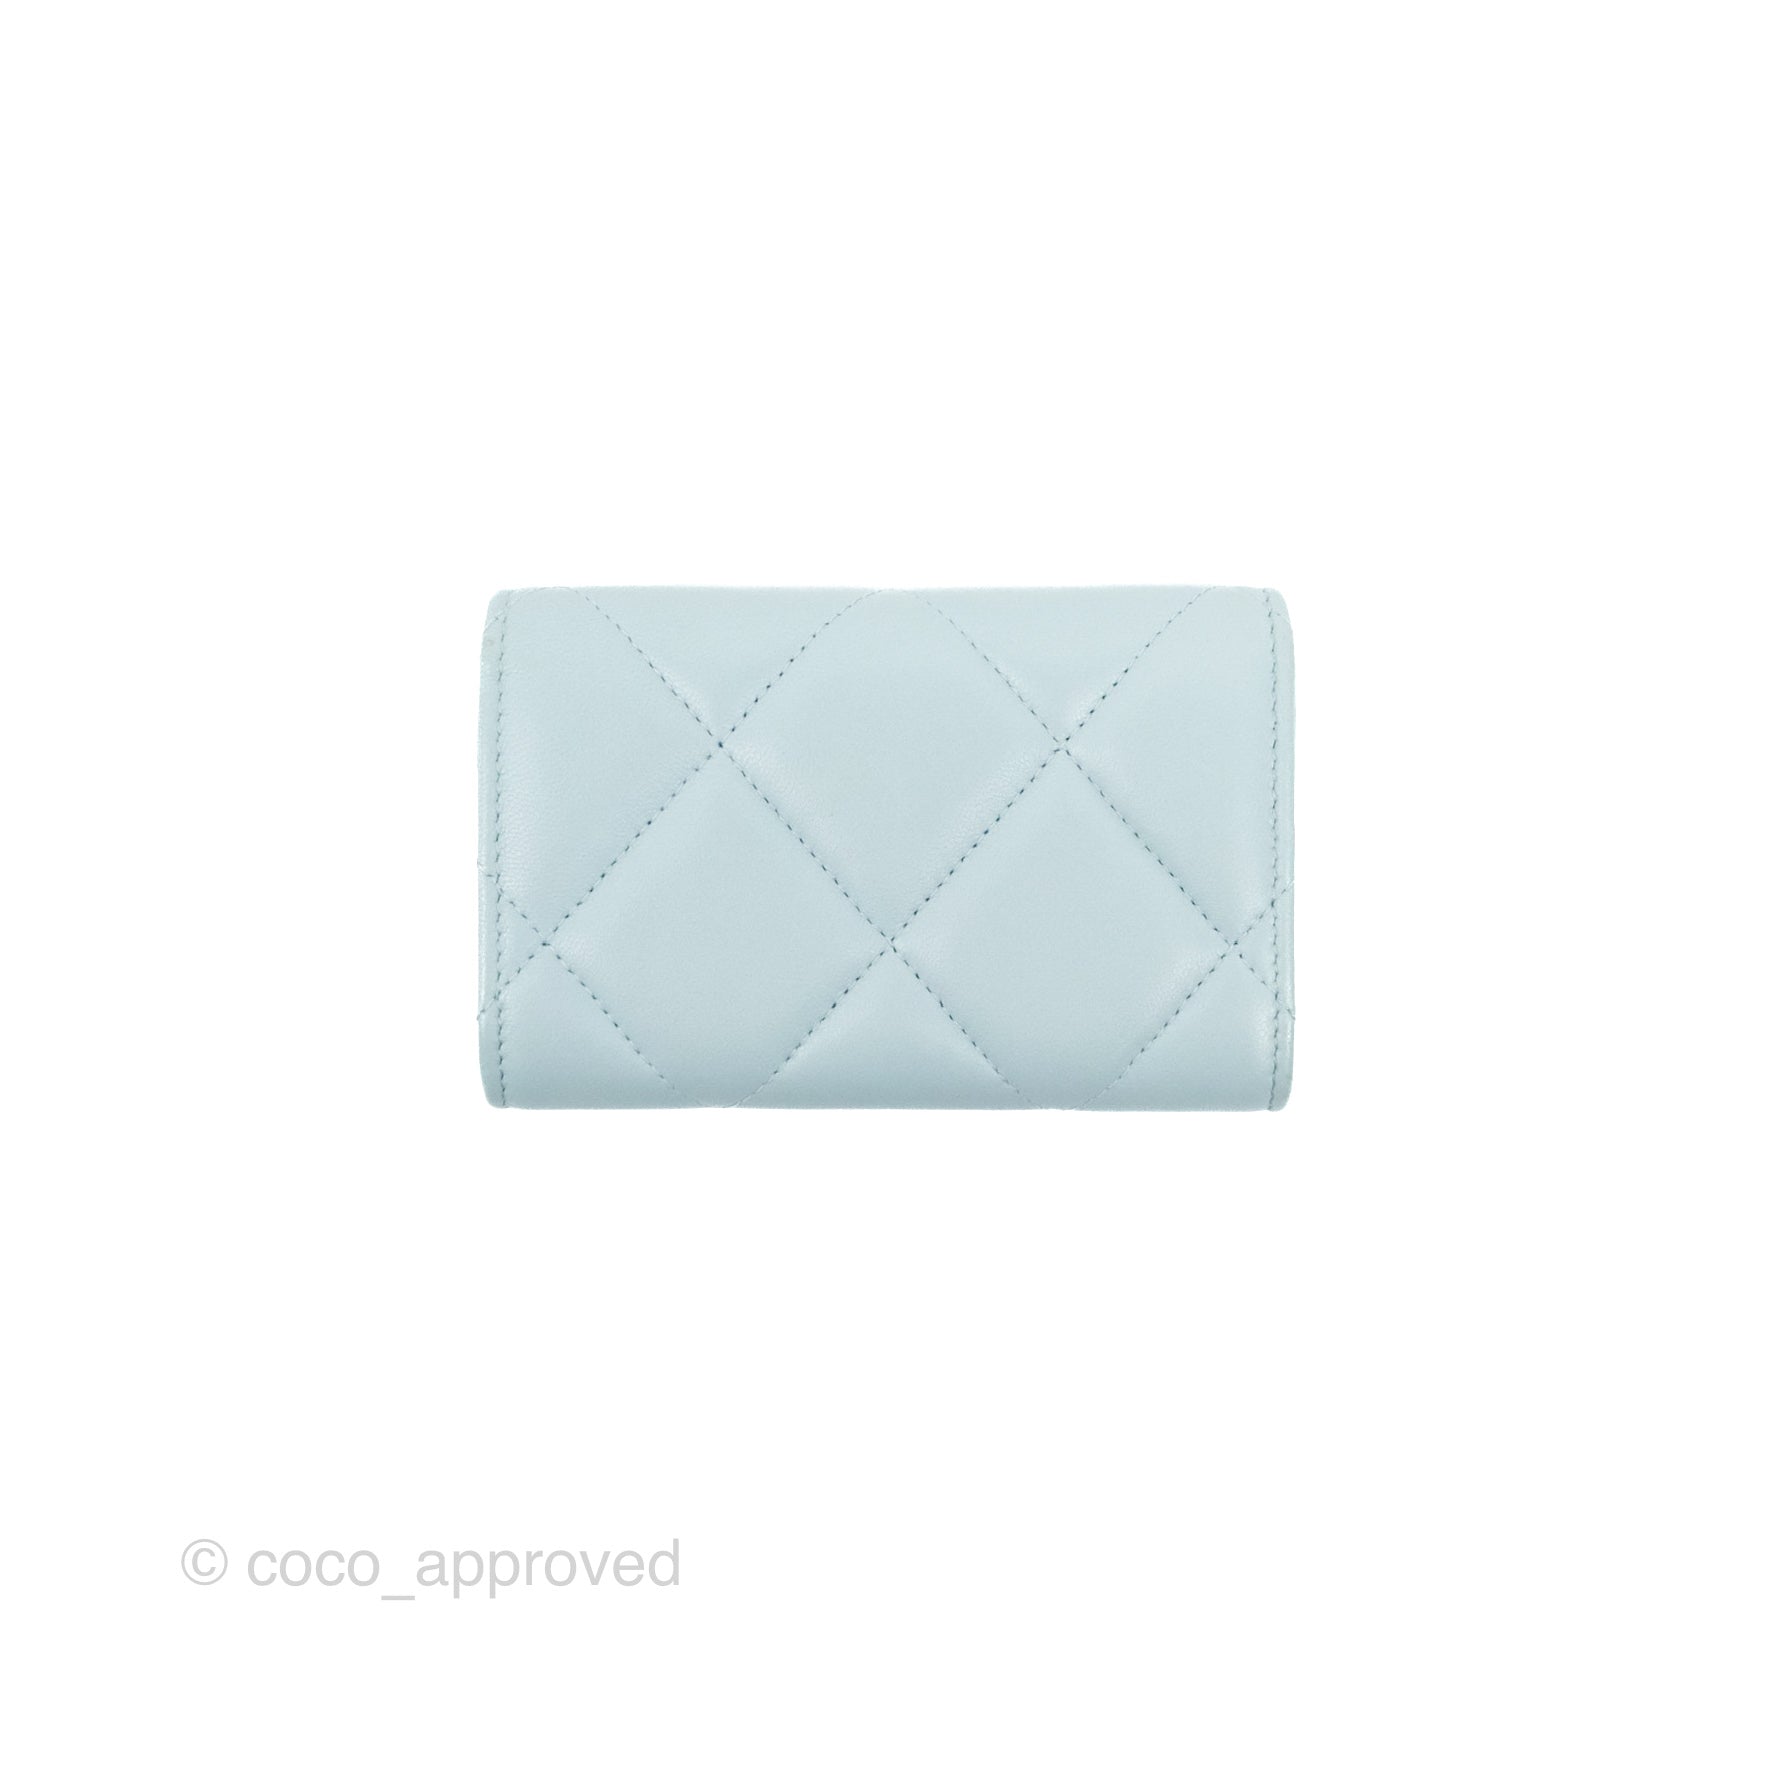 Chanel Blue Grained Leather Interlocking C's Card Slots Snap